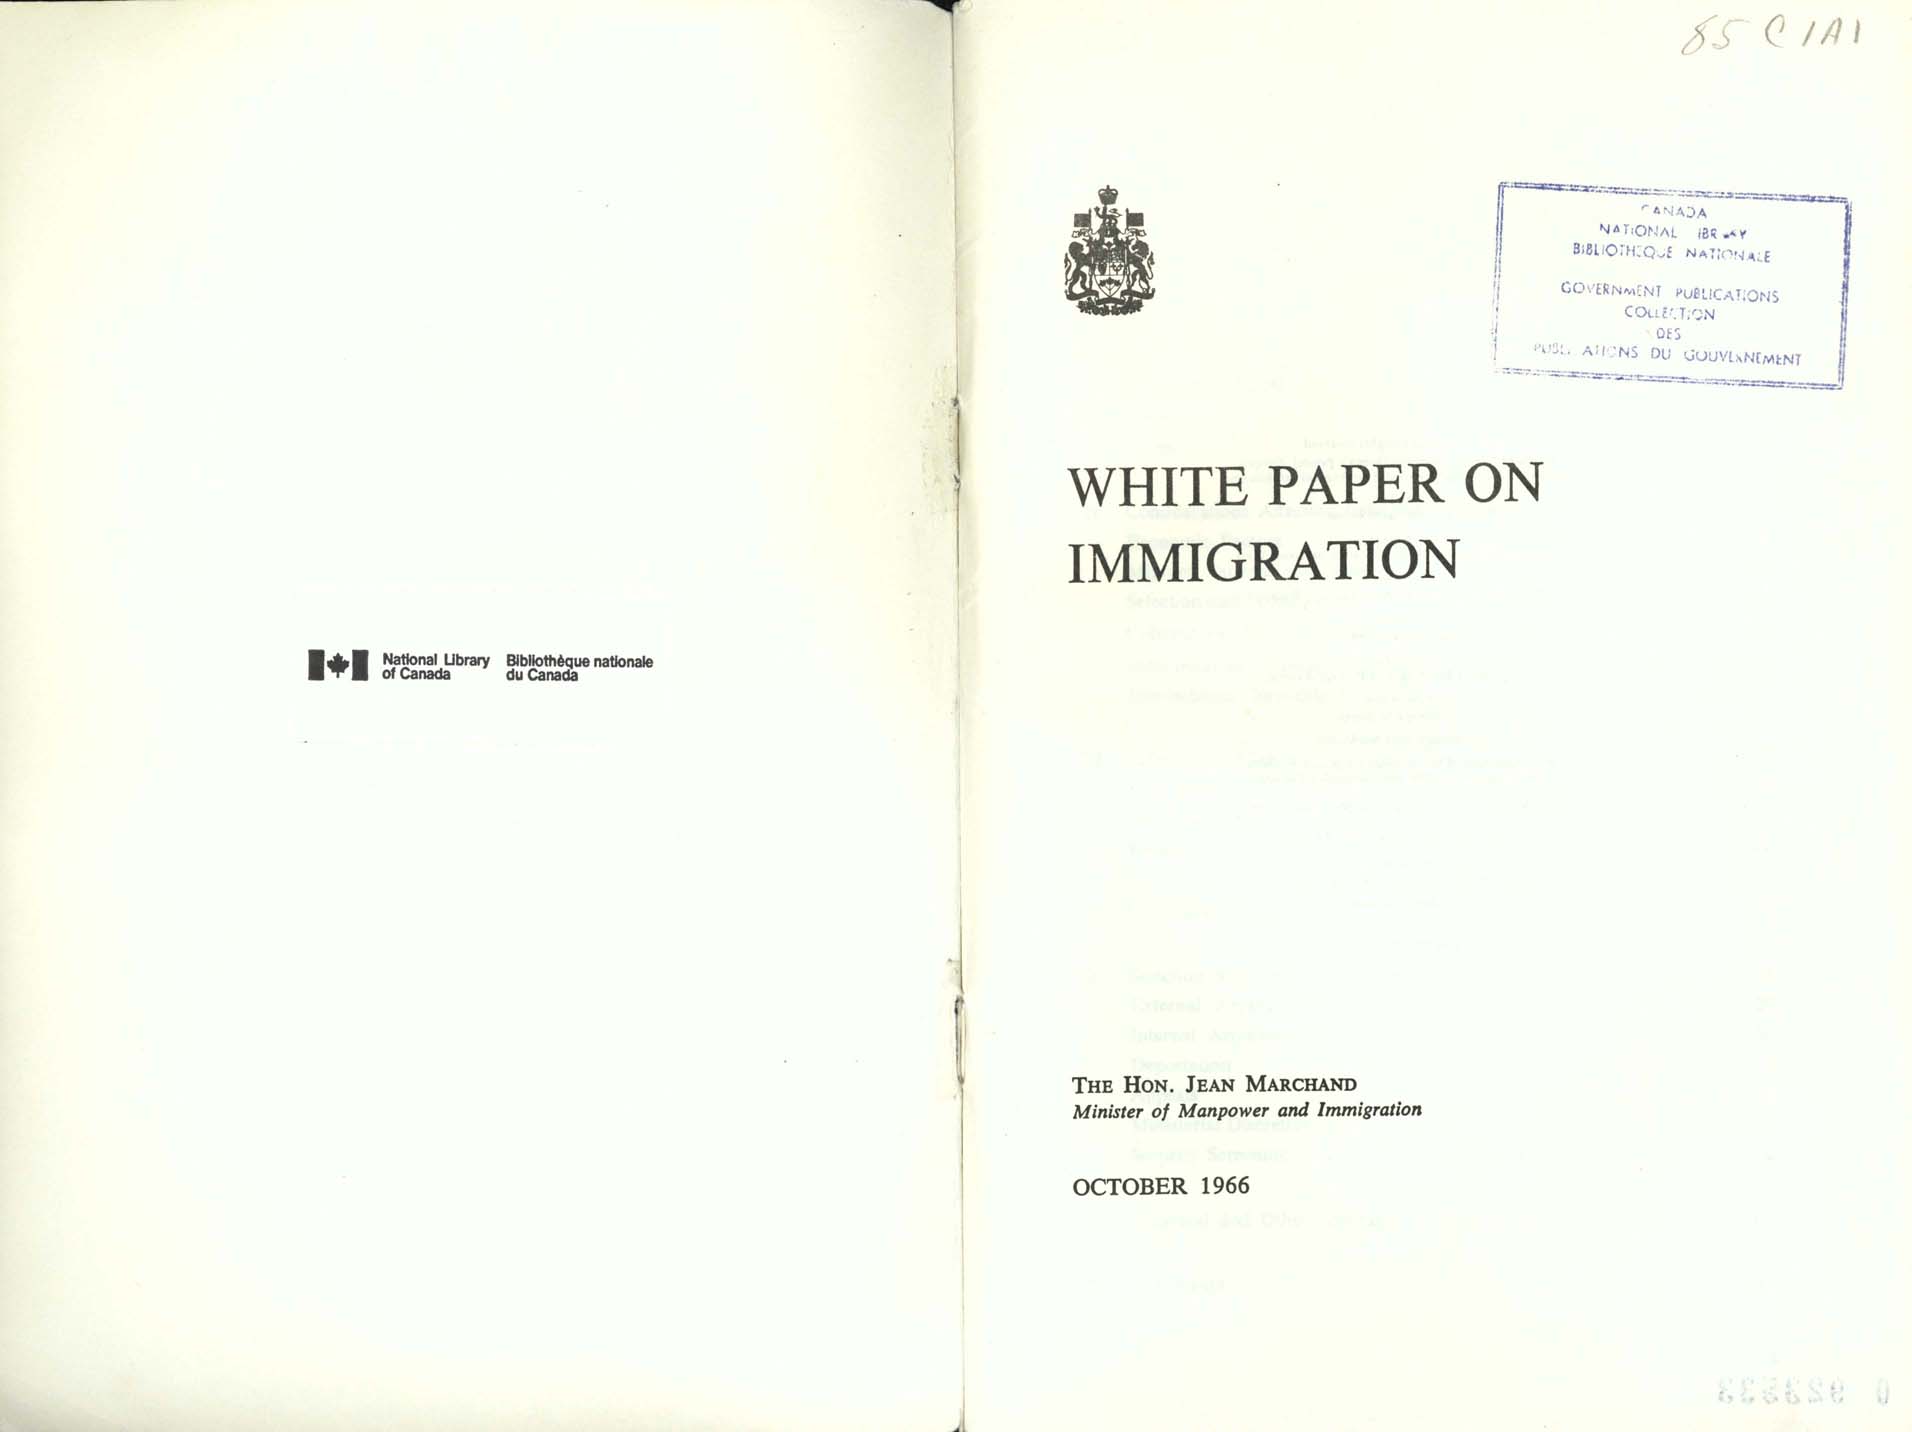 White Paper on Immigration, 1966